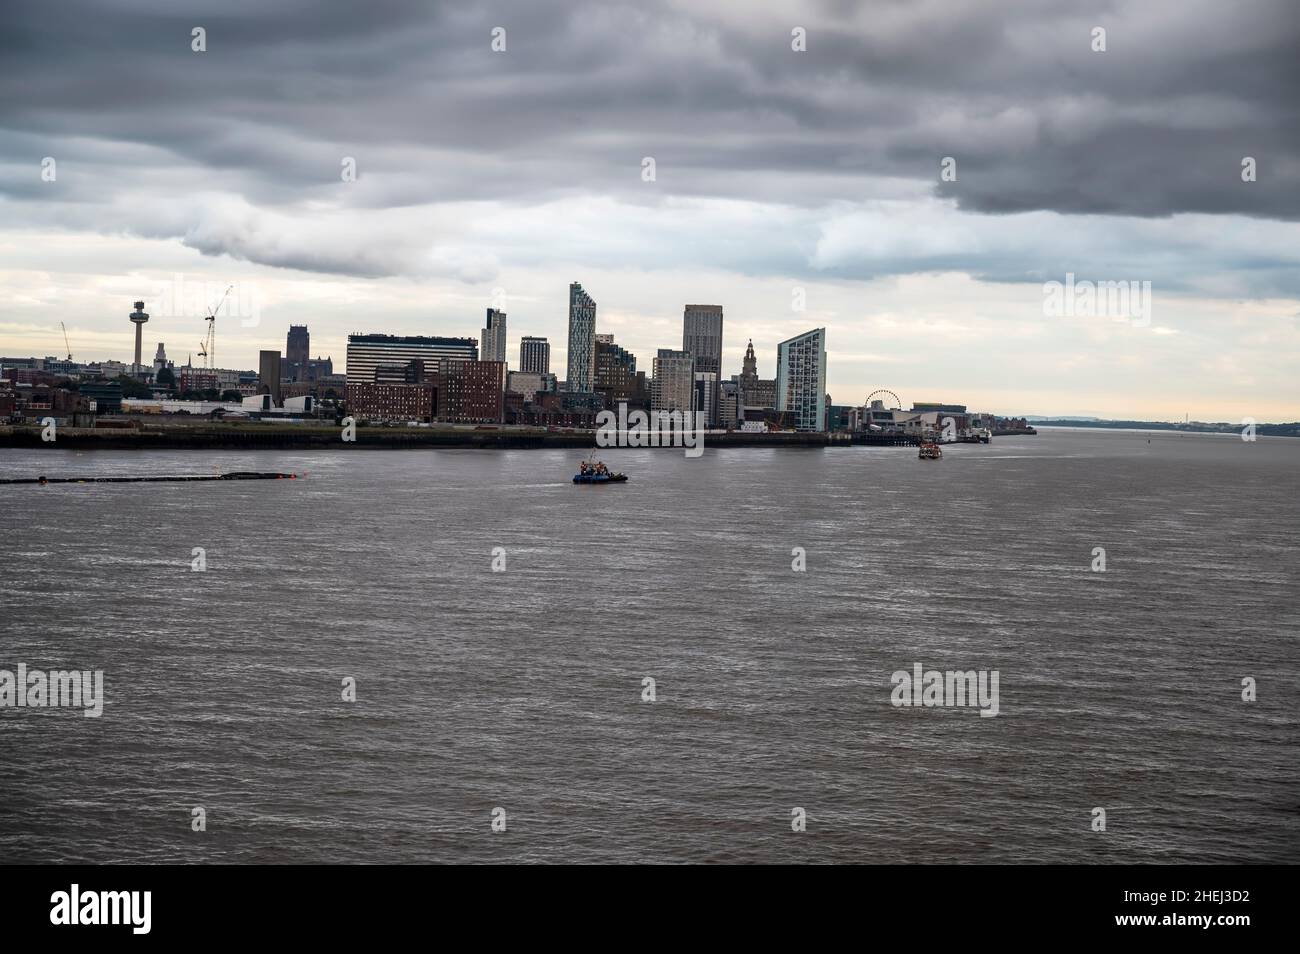 Liverpool, England - September 25, 2021: View towards Liverpool City Centre from Stena Line ferry docked on river Mersey in Birkenhead. Stock Photo